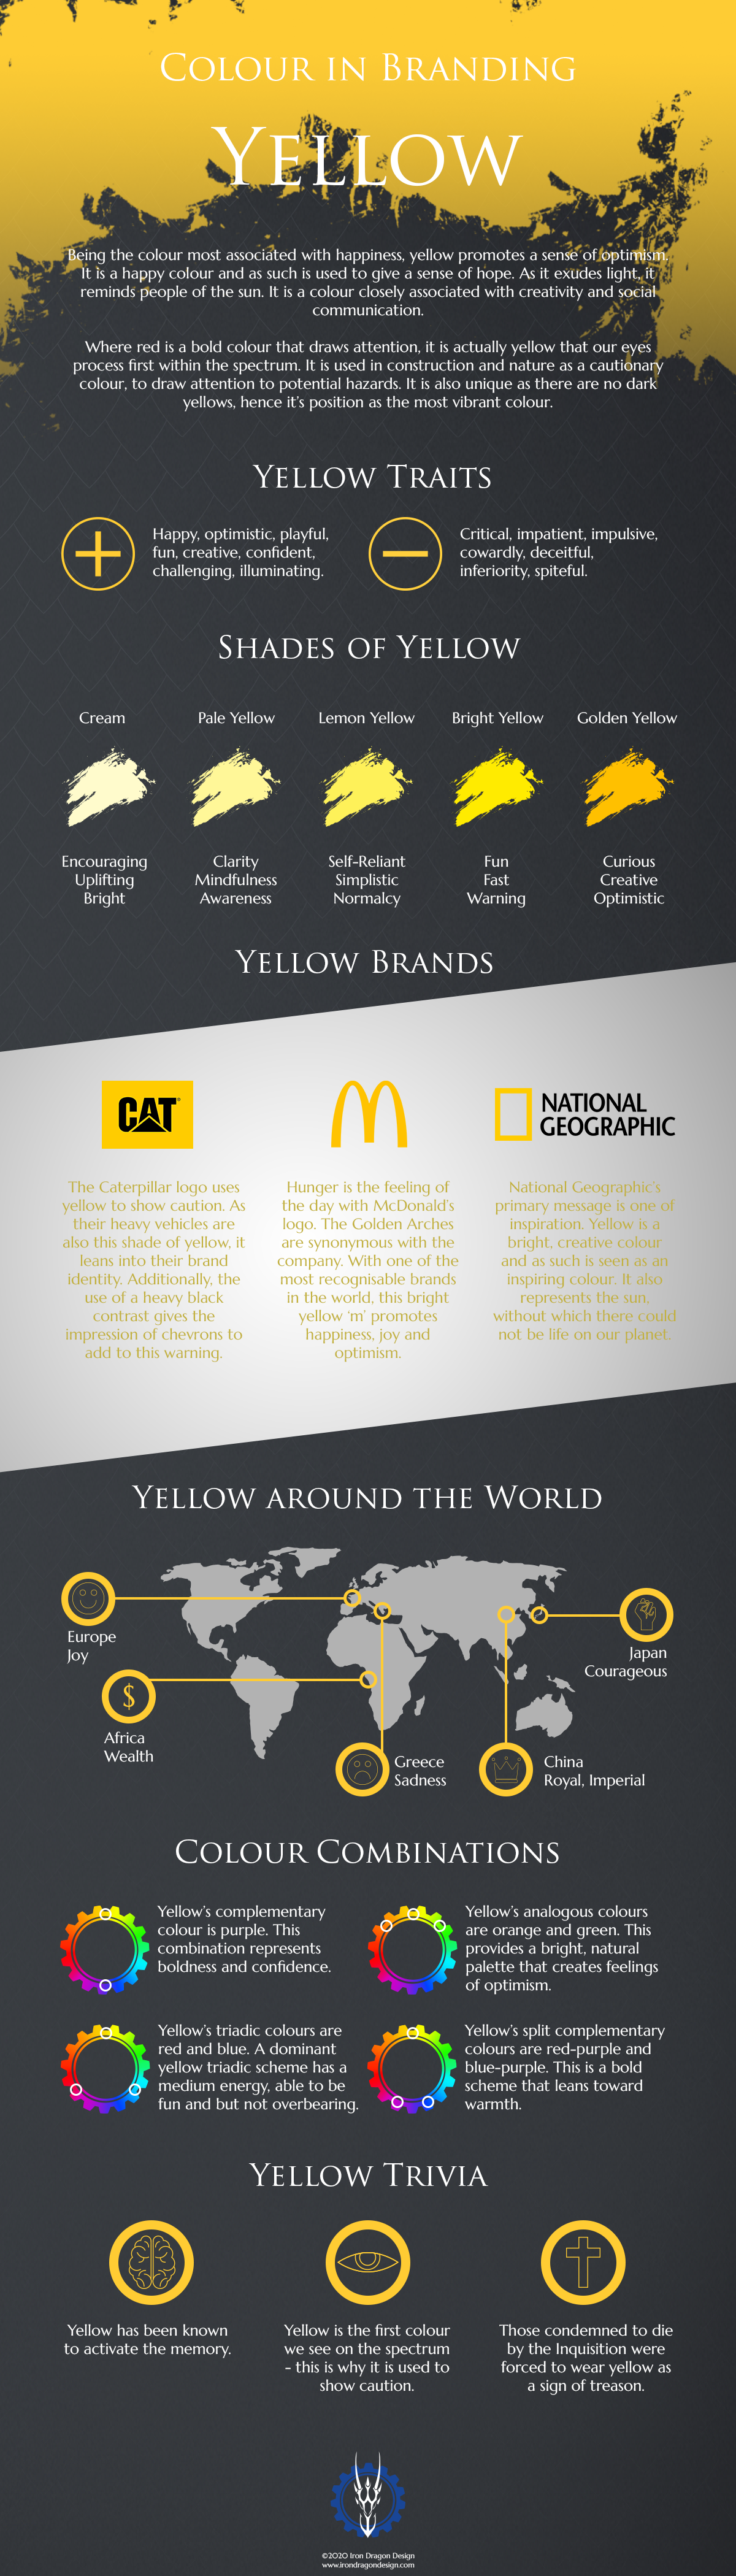 Colours in Branding Yellow